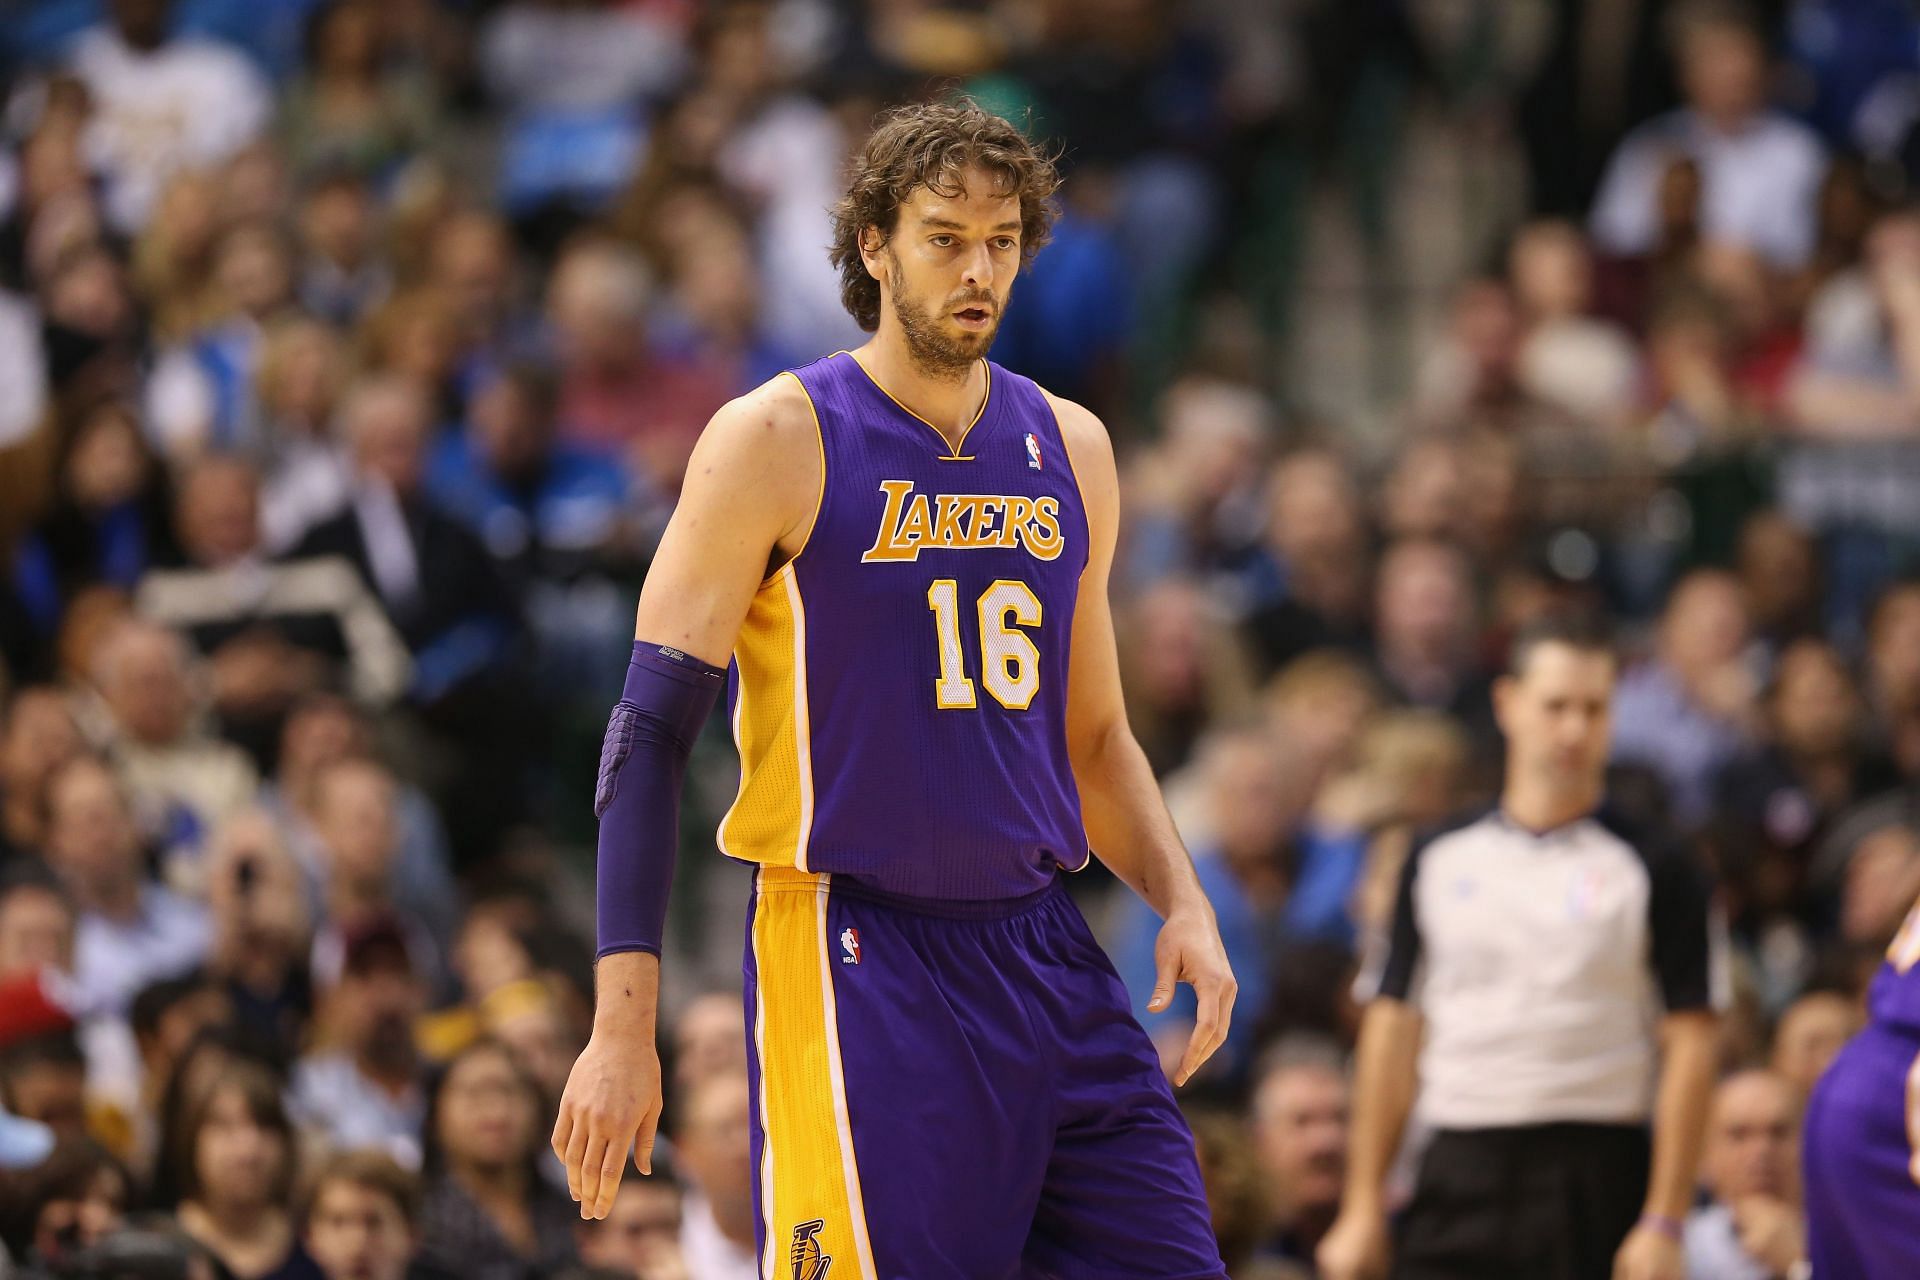 Pau Gasol deserves to have his jersey retired by the Lakers